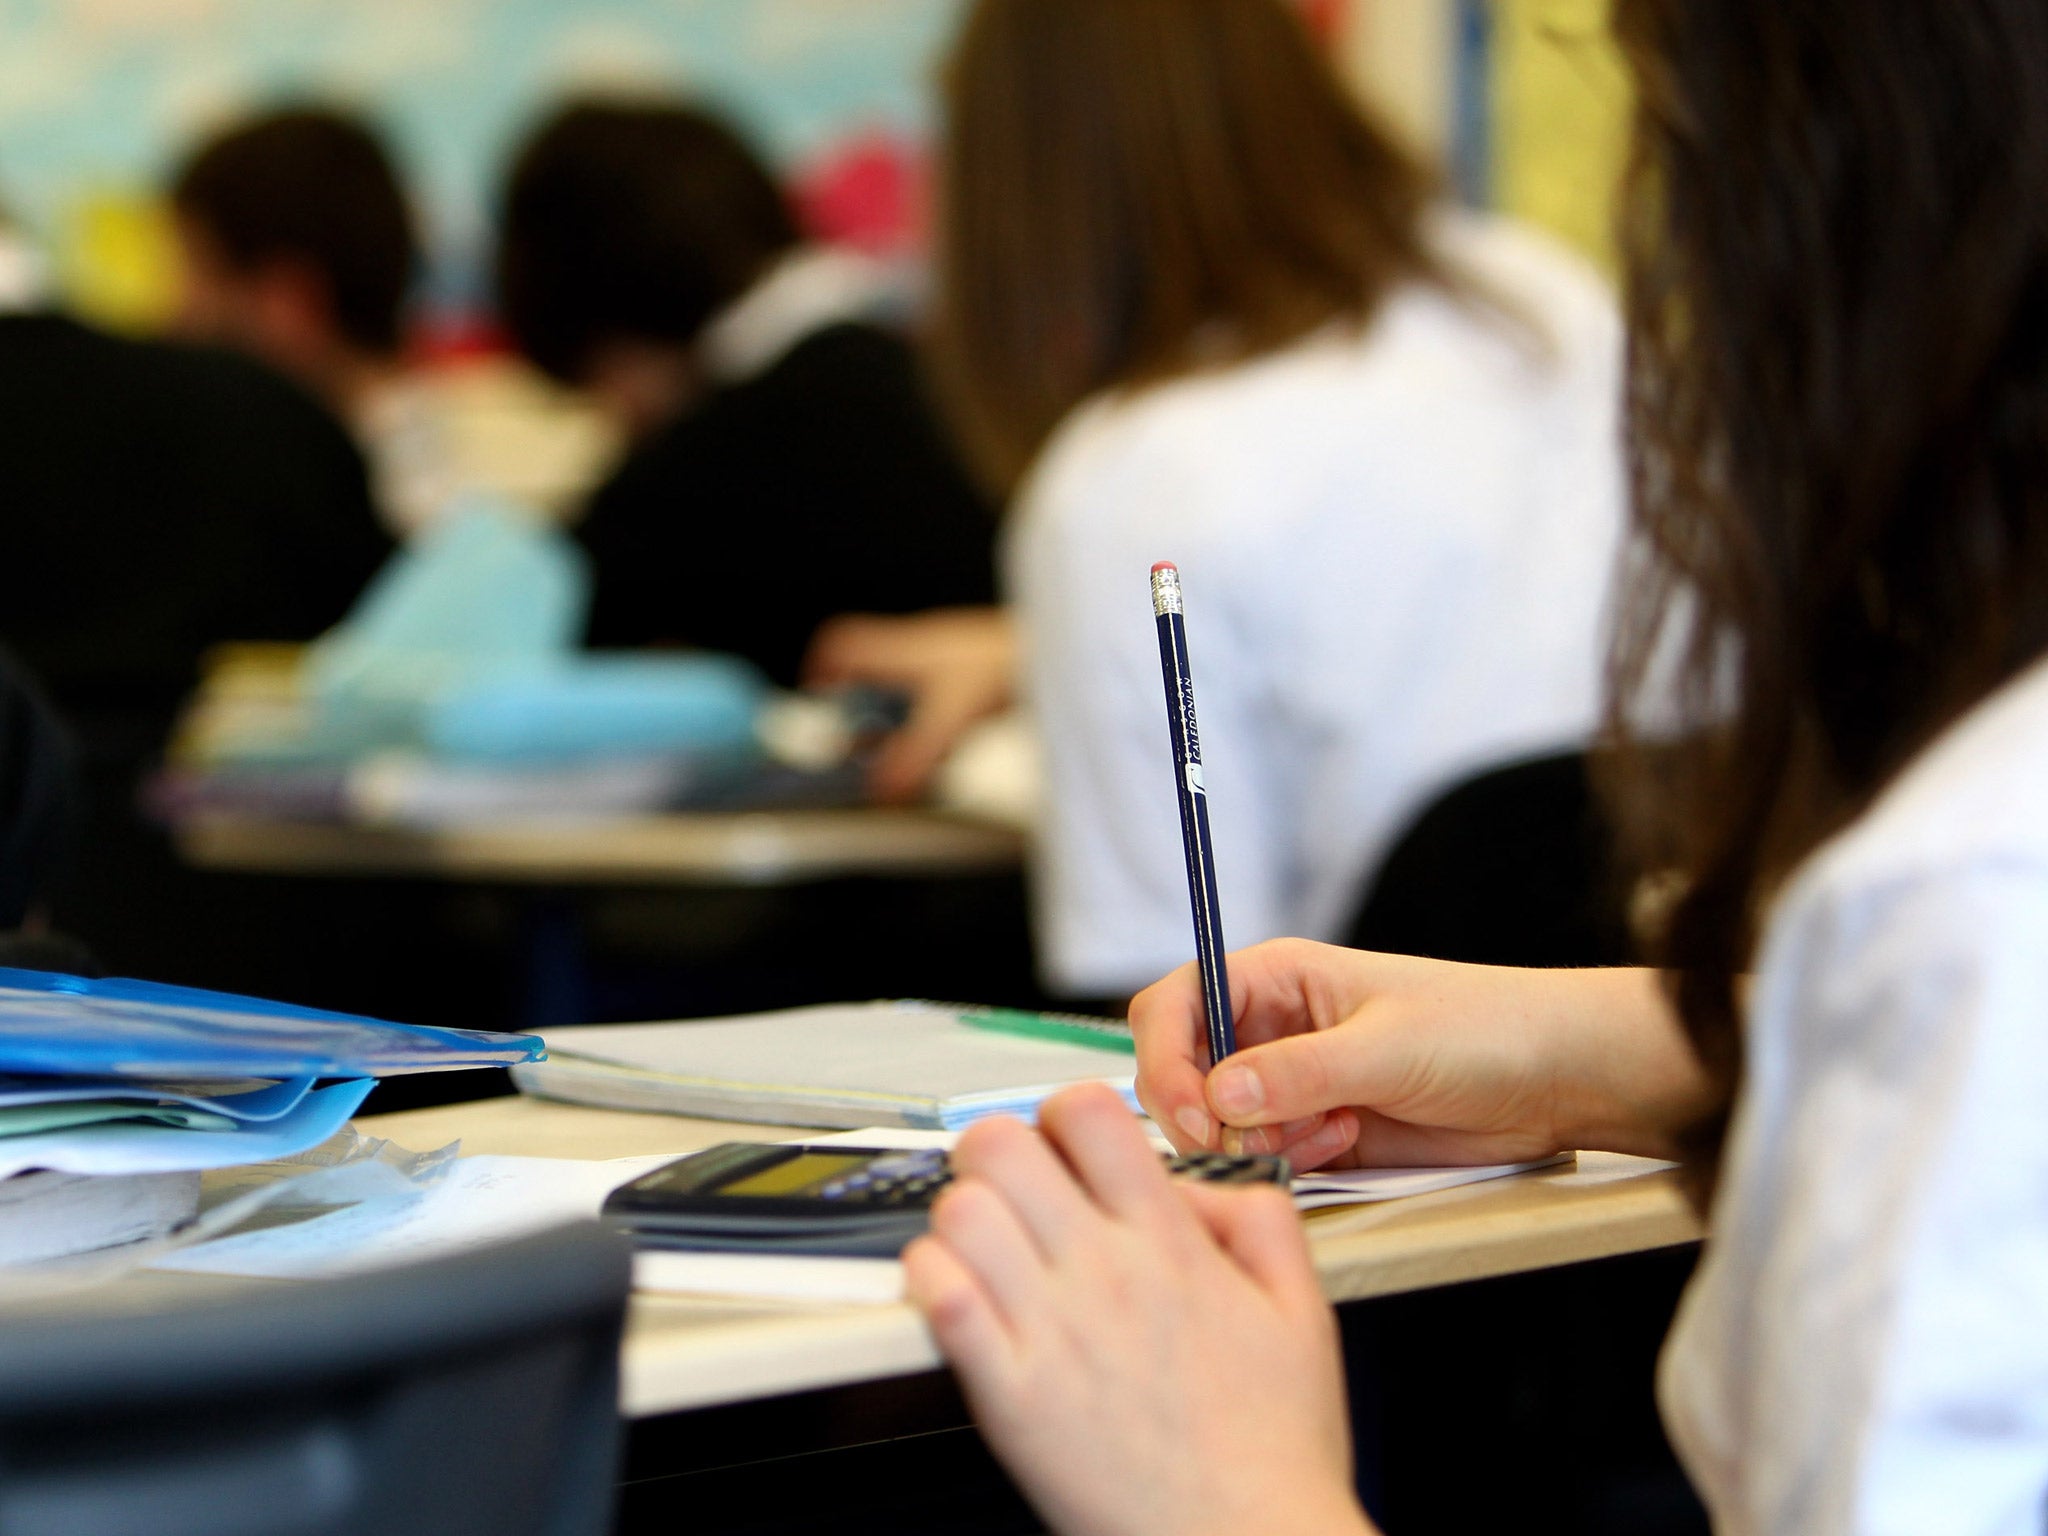 The Department for Education said it would actively address underperformance in any schools